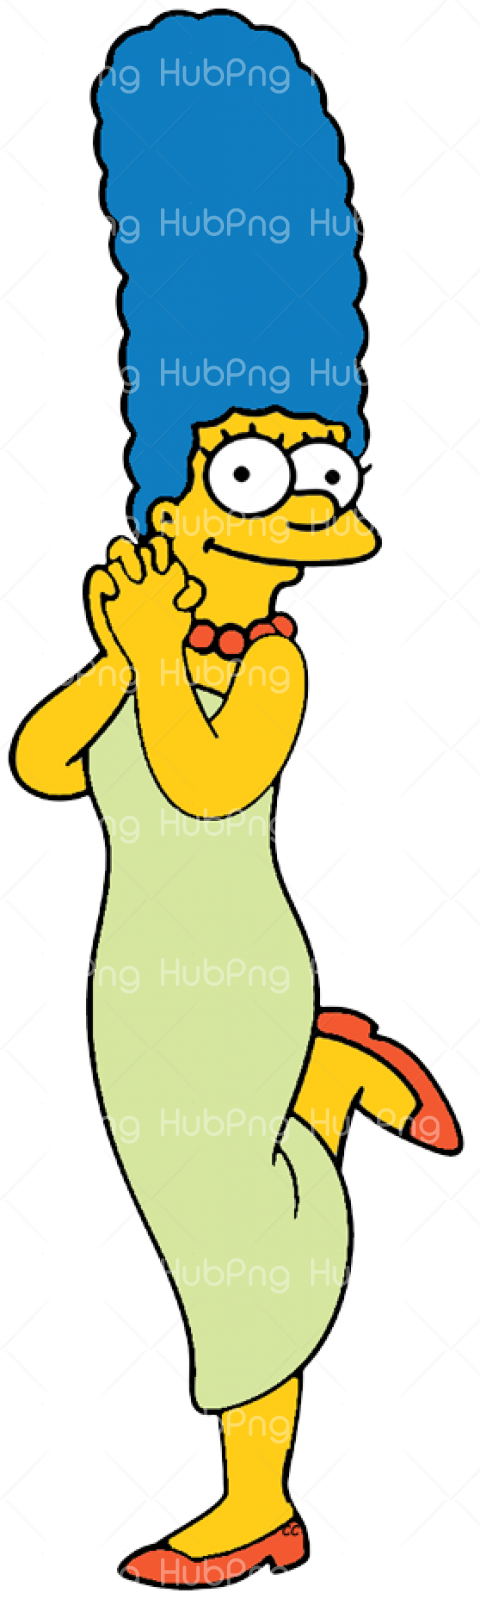 marge simpson png clipart hd Transparent Background Image for Free